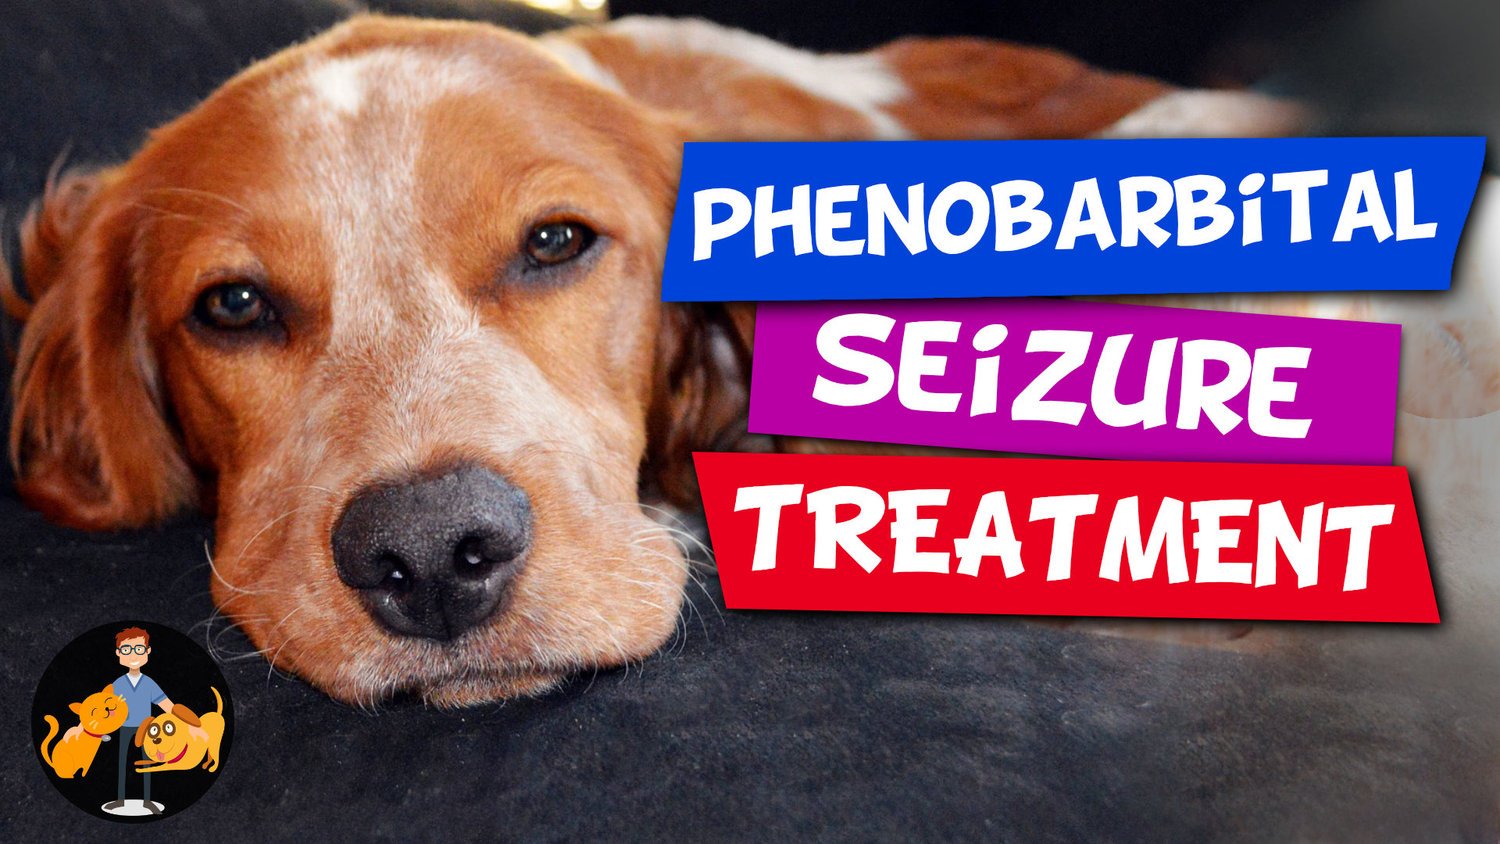 Dr Alex Phenobarbital The Best Treatment For Dog Epilepsy Penobarbital Is One Of The Most Common Drugs Used In The Treatment Of Dog Epilepsy And To Control Seizures Learn About